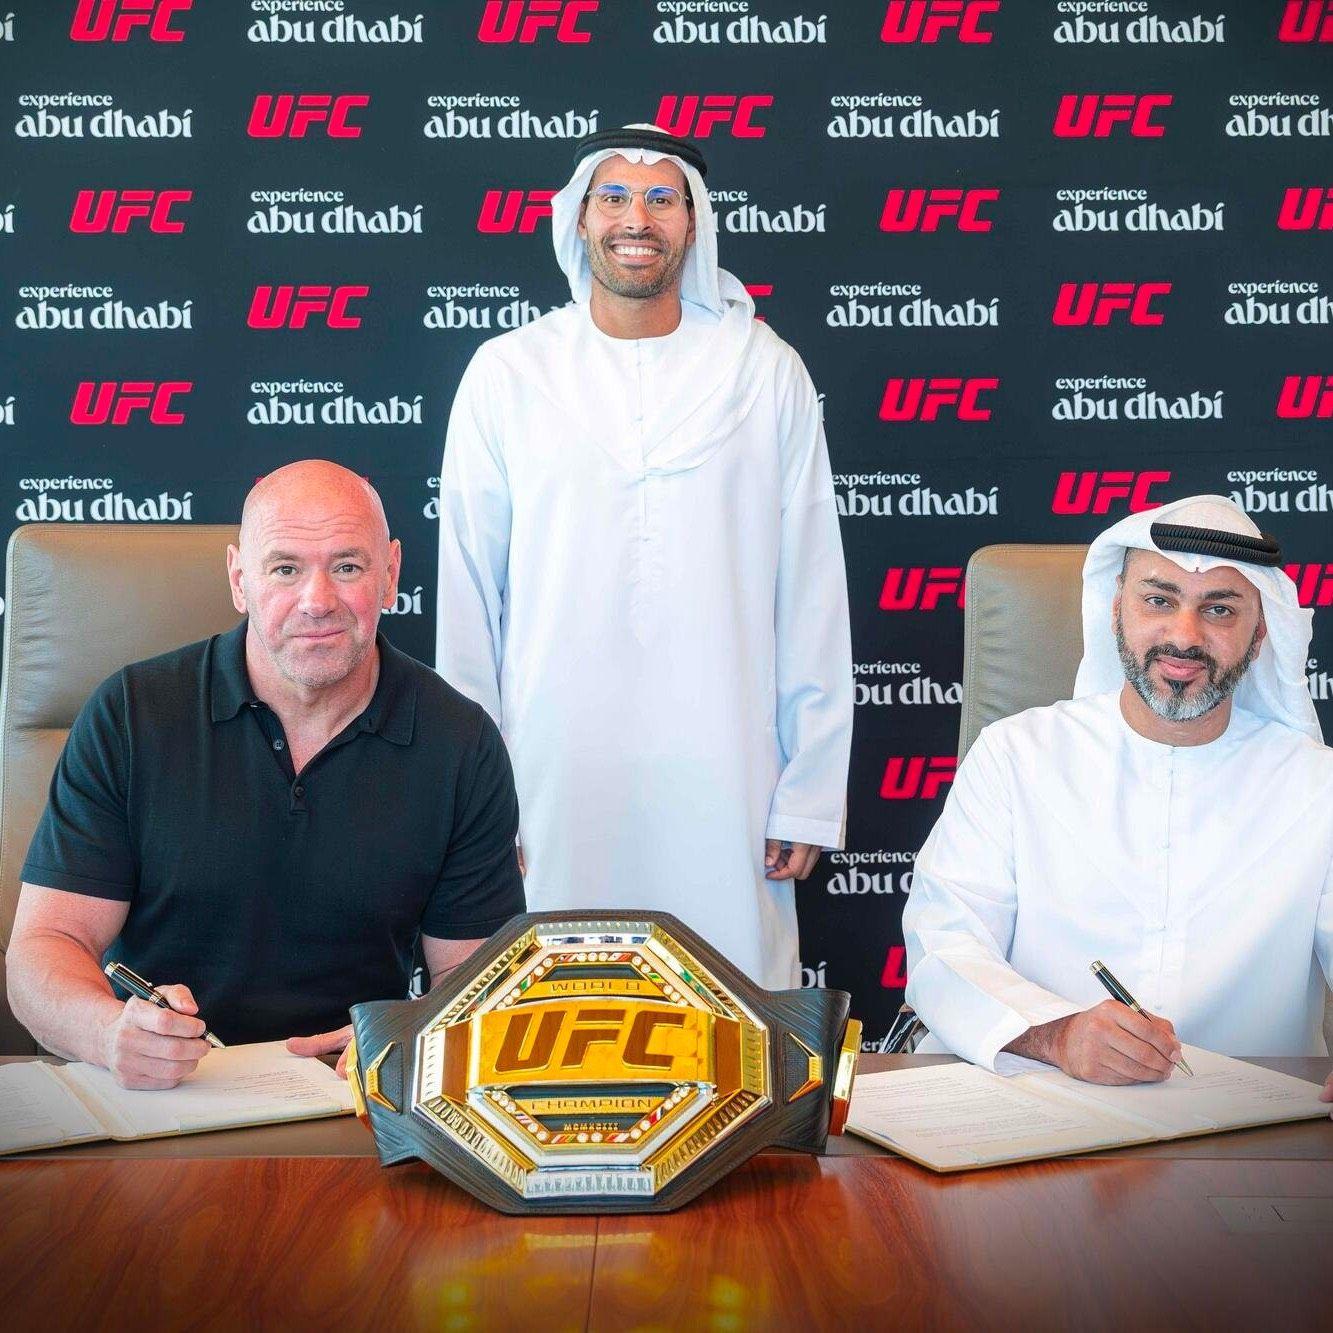 The UFC extends its partnership with Abu Dhabi until 2028